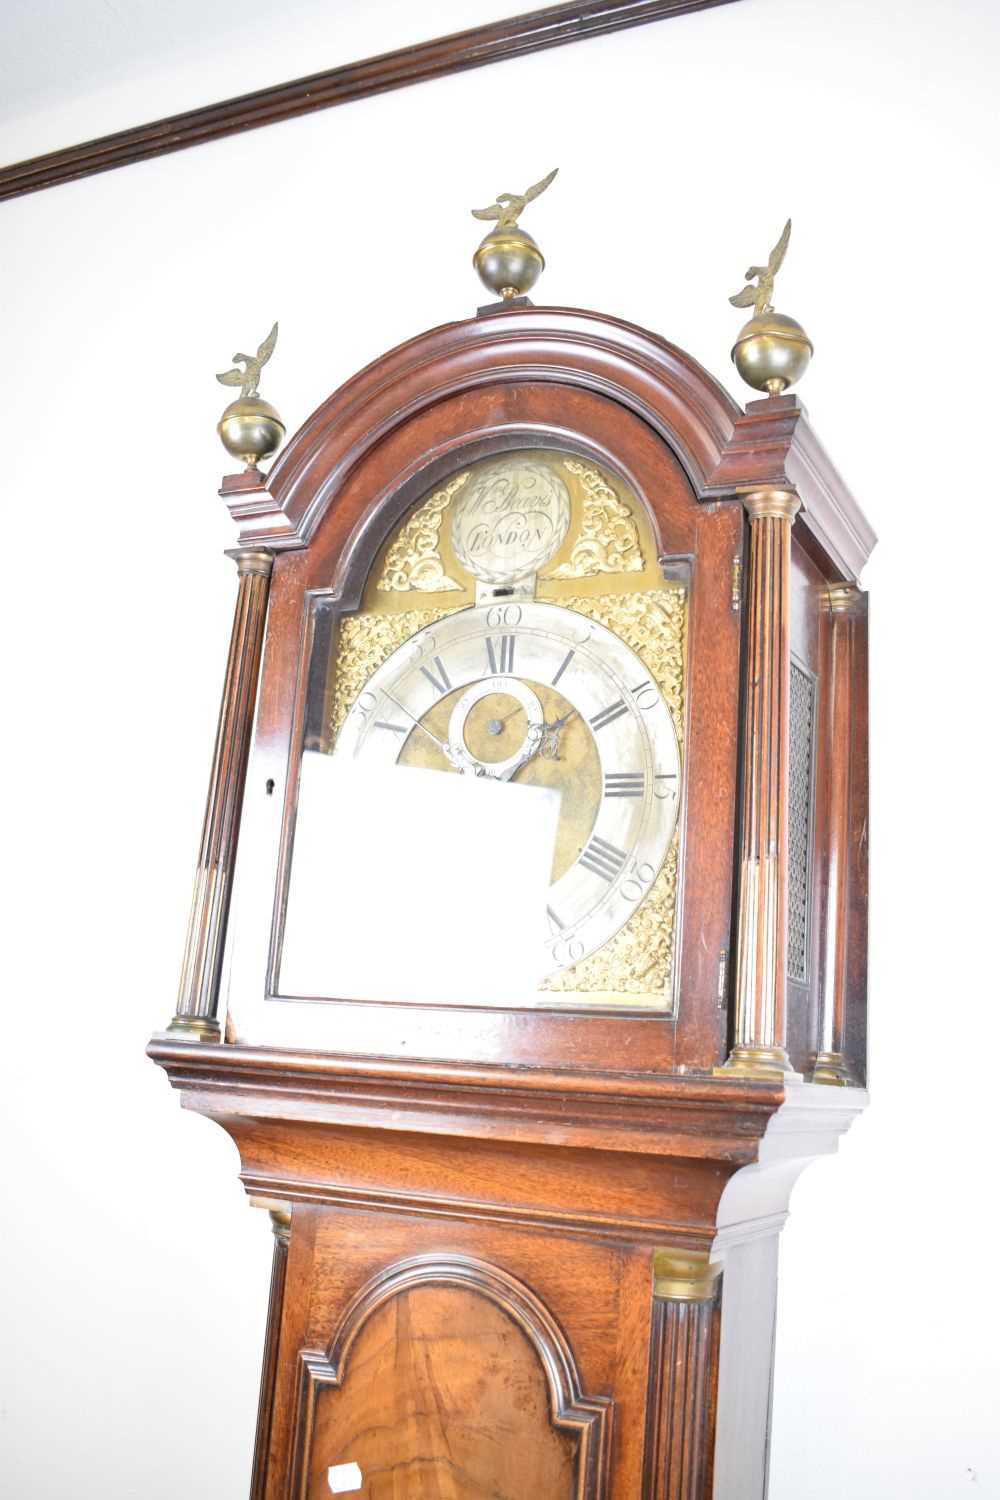 Early George III mahogany-cased 8-day brass dial longcase clock - Image 3 of 9